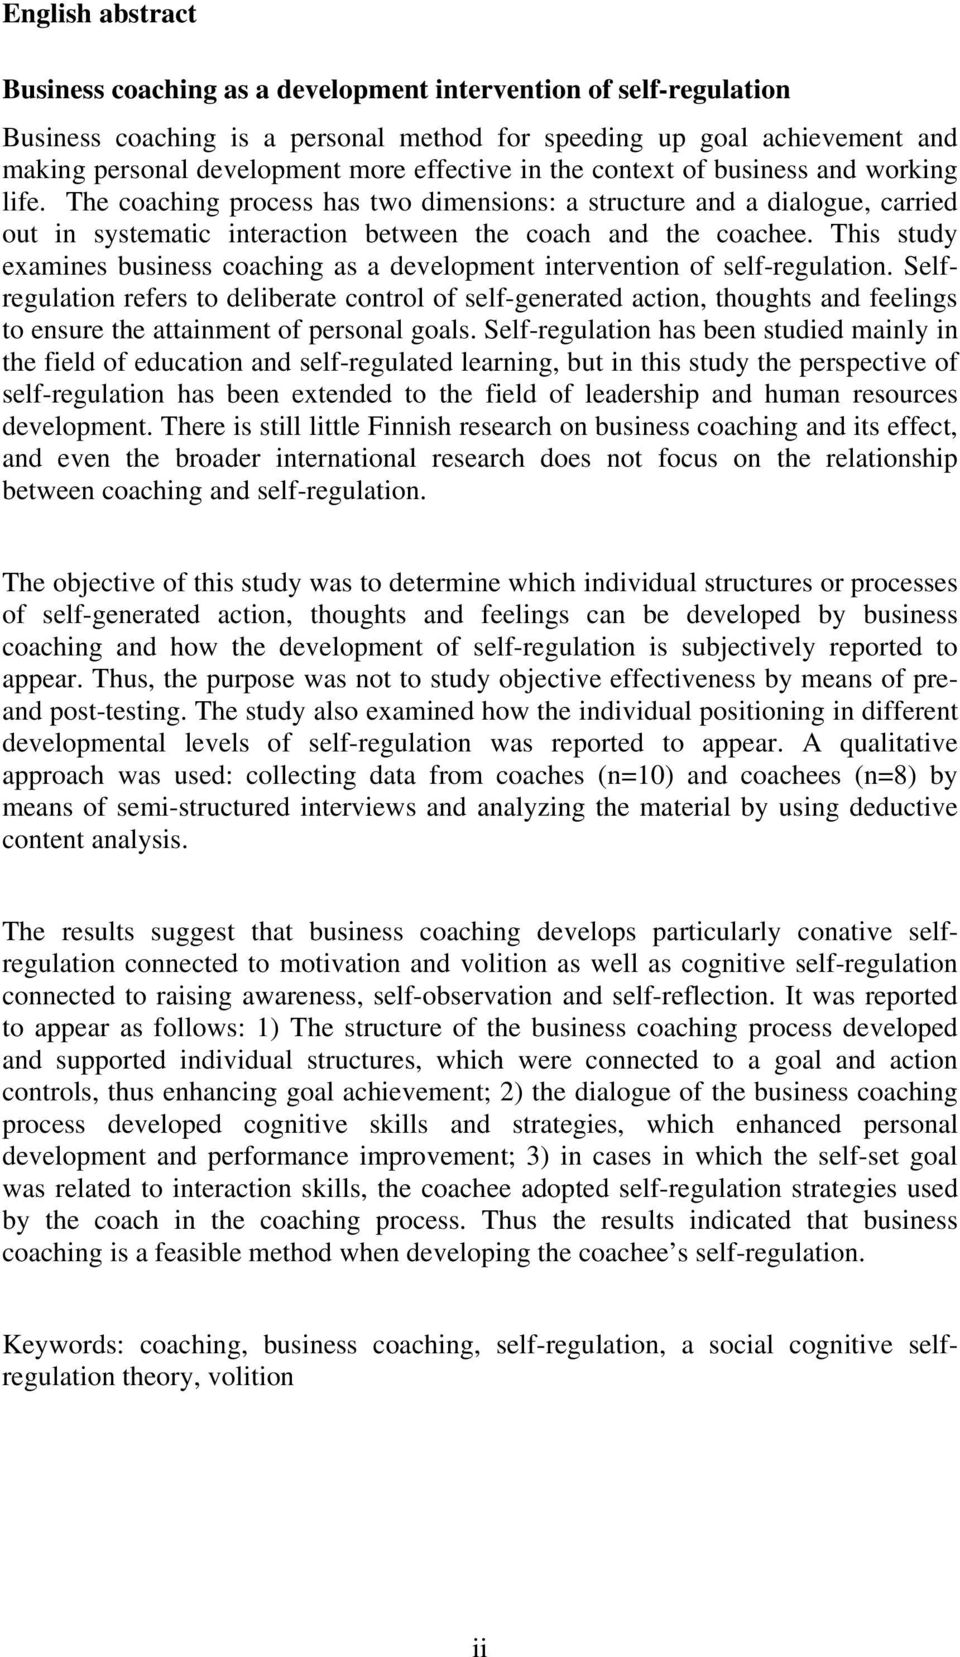 This study examines business caching as a develpment interventin f self-regulatin.